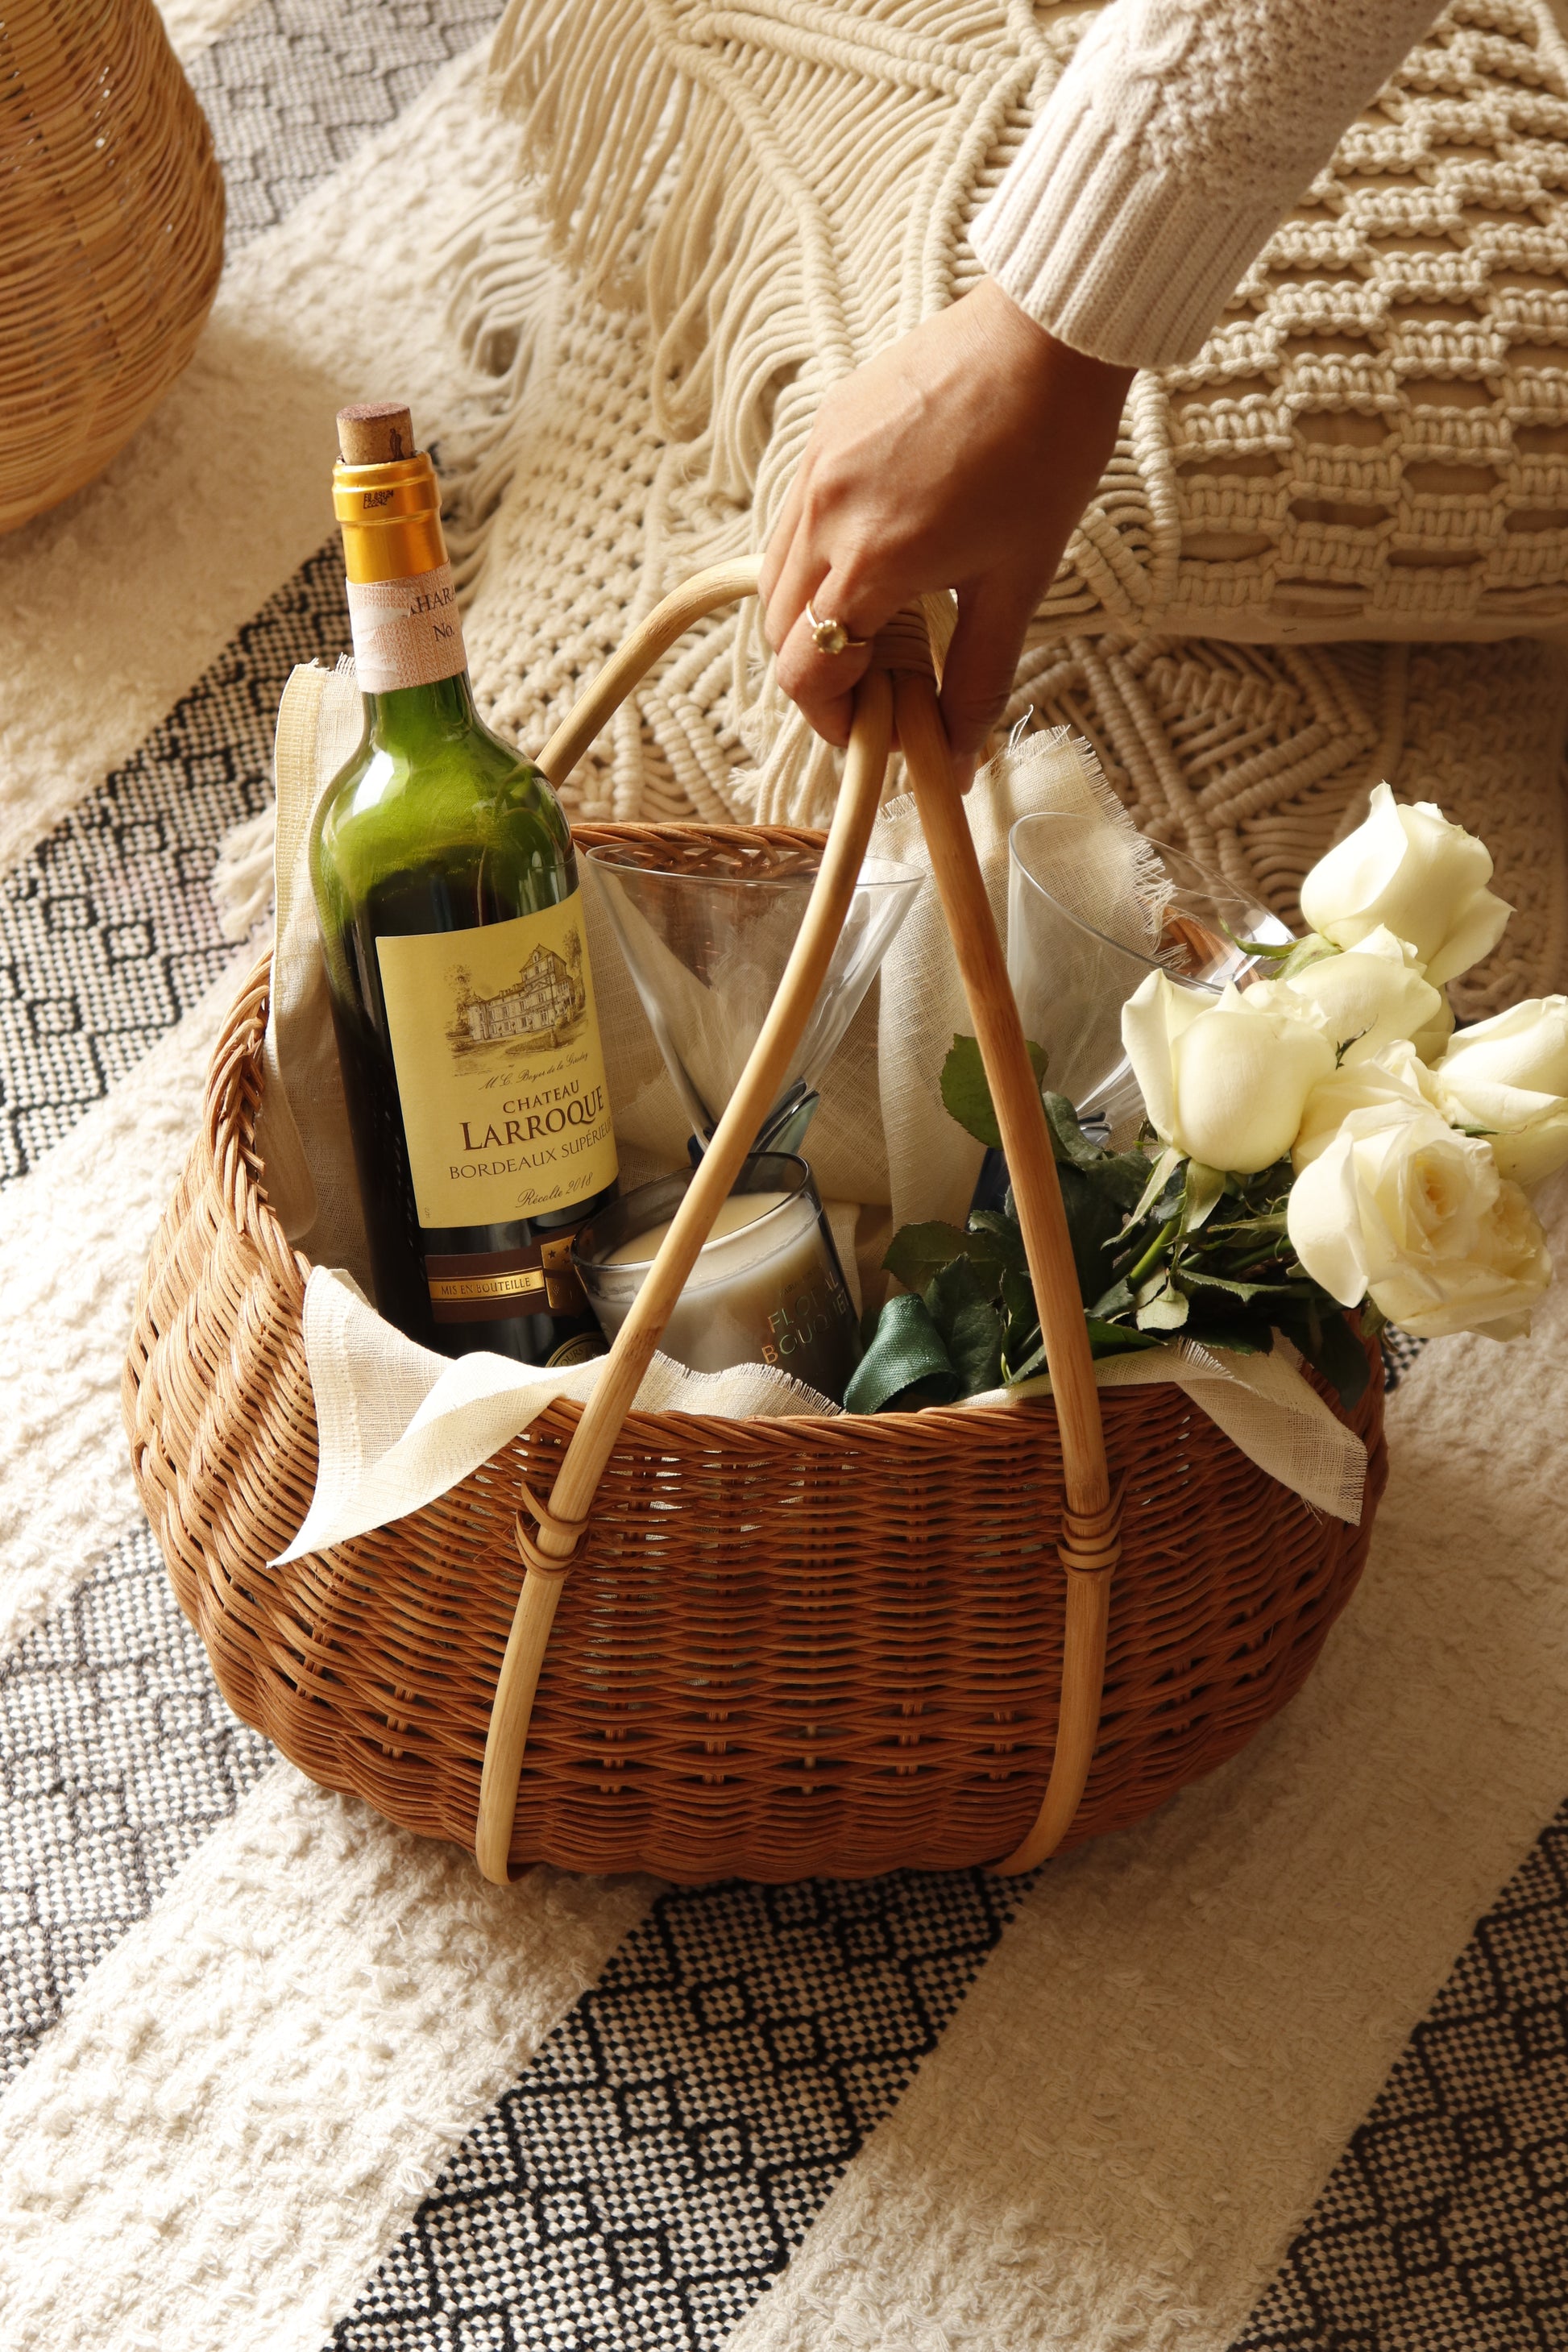 Enhance your Dream Home with our curated selection of premium wall and Home Décor items. Rattan Storage Basket With Handle made from 100% natural rattan which is eco-friendly and durable. This traditional style picnic basket is a “must have” for anyone that enjoys the great outdoors. The basket is a versatile and stylish organizational solution and it offers a natural and textured look. tesu